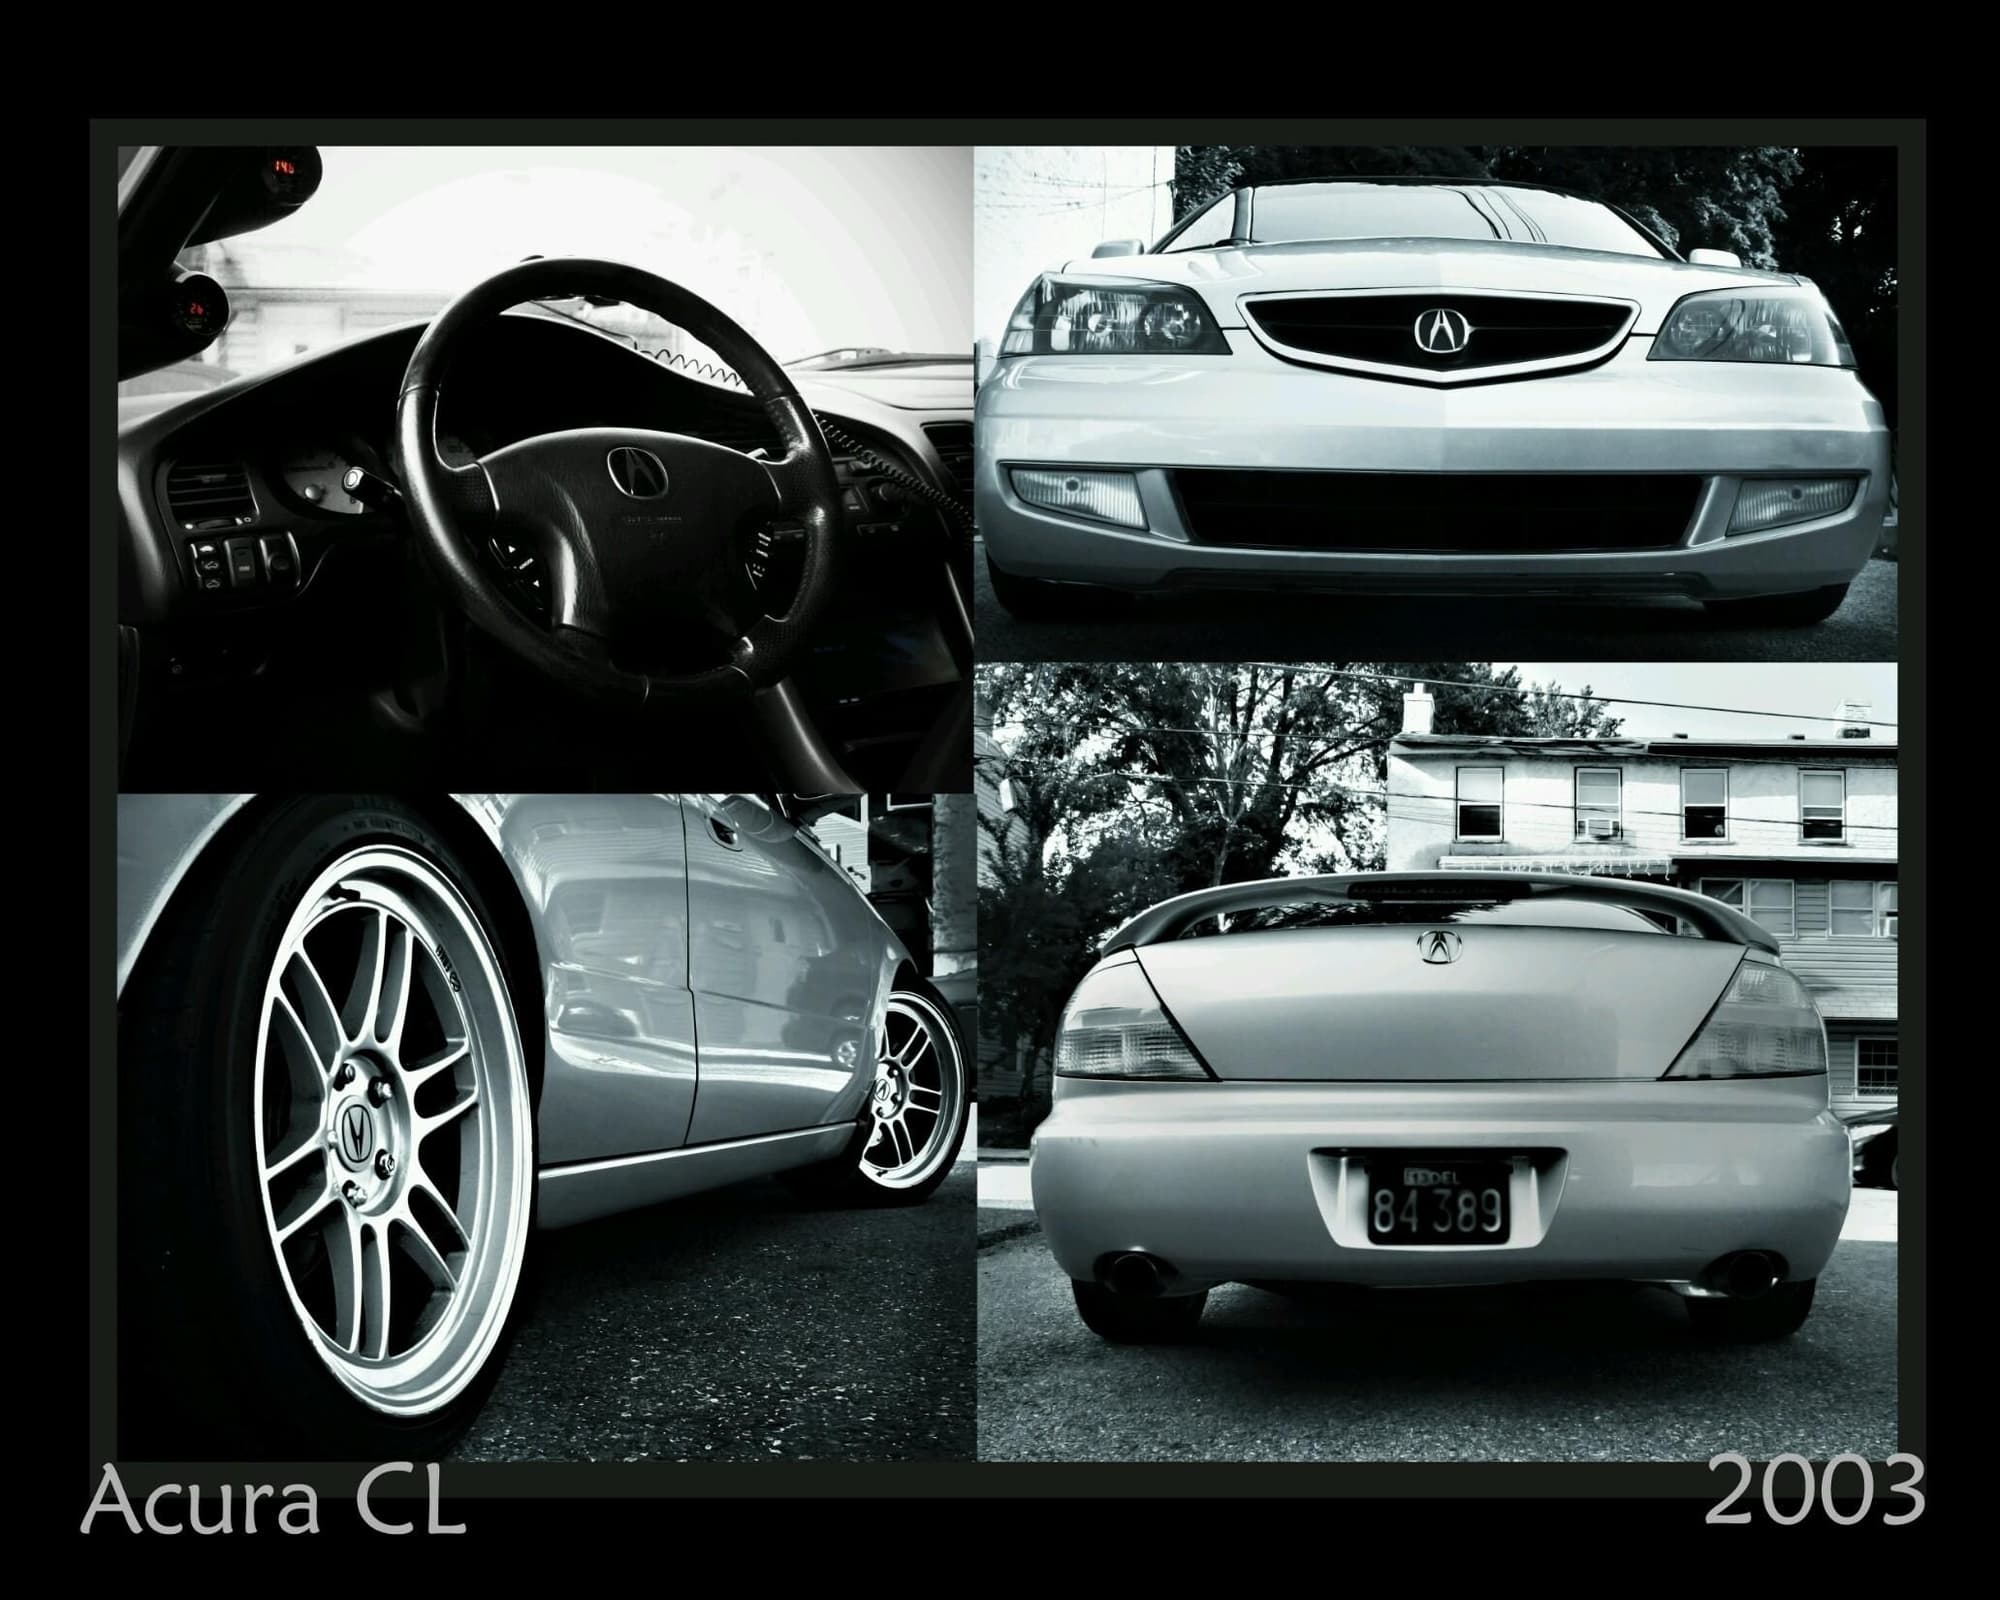 2003 Acura CL - CLOSED: 3.6 supercharged 2003 CL - Used - VIN 19uya41663a005391 - 280,000 Miles - 6 cyl - 2WD - Manual - Coupe - Silver - Newcastle, DE 19720, United States